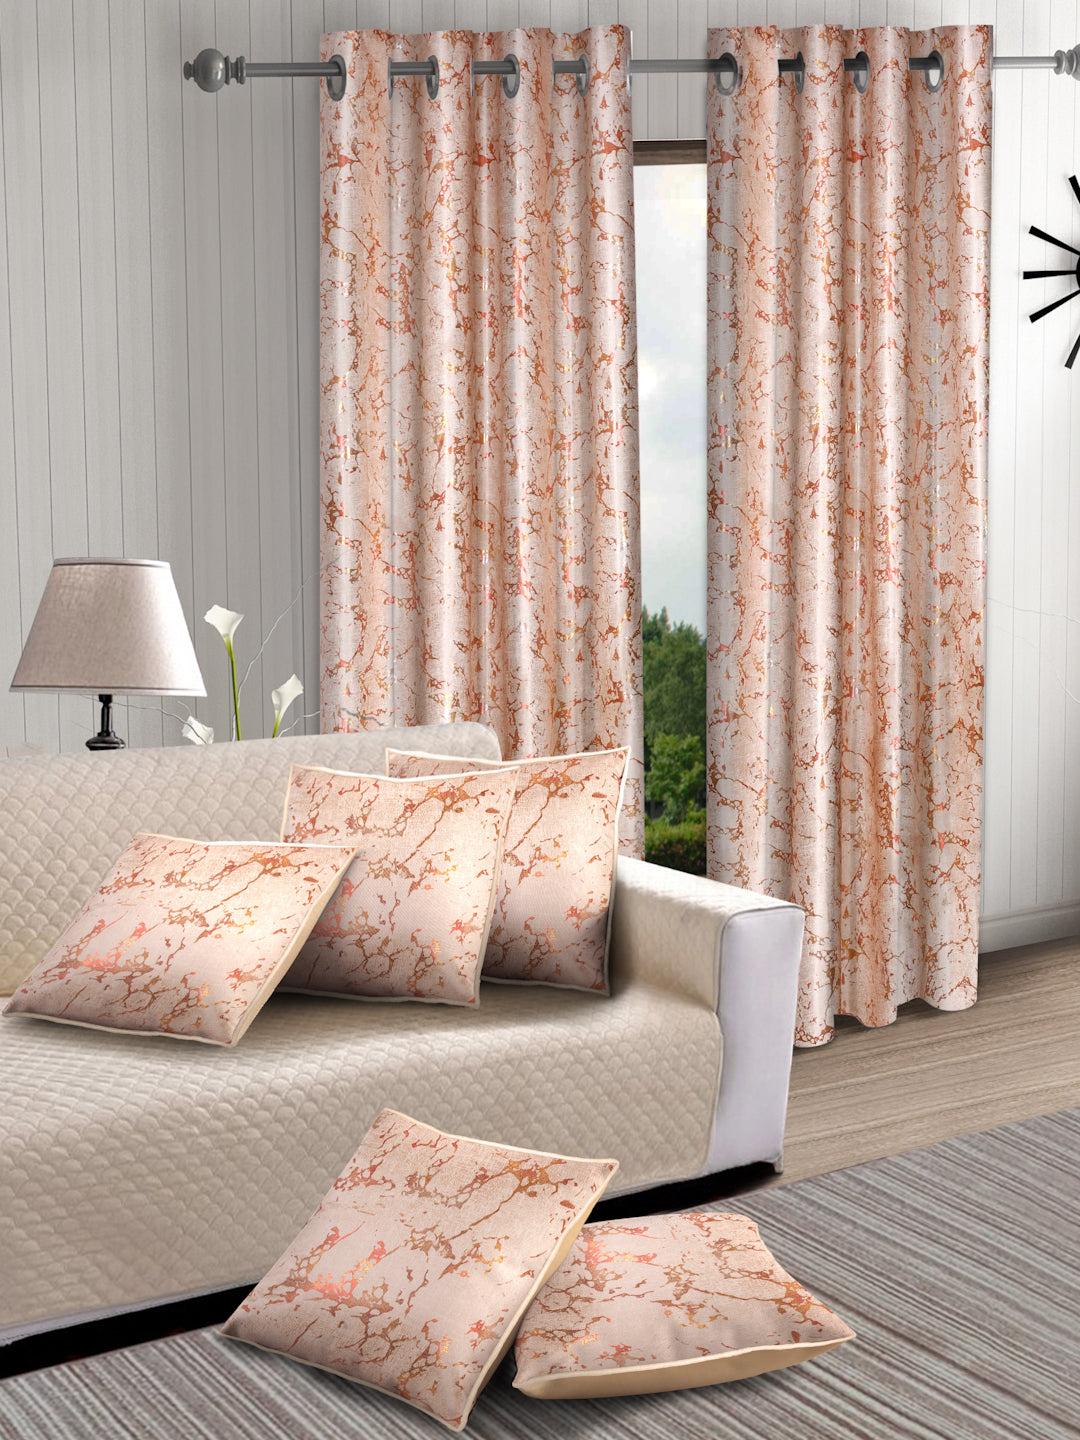 Set of 2 Knitted Window Curtains with 5 Cushion Covers- Beige